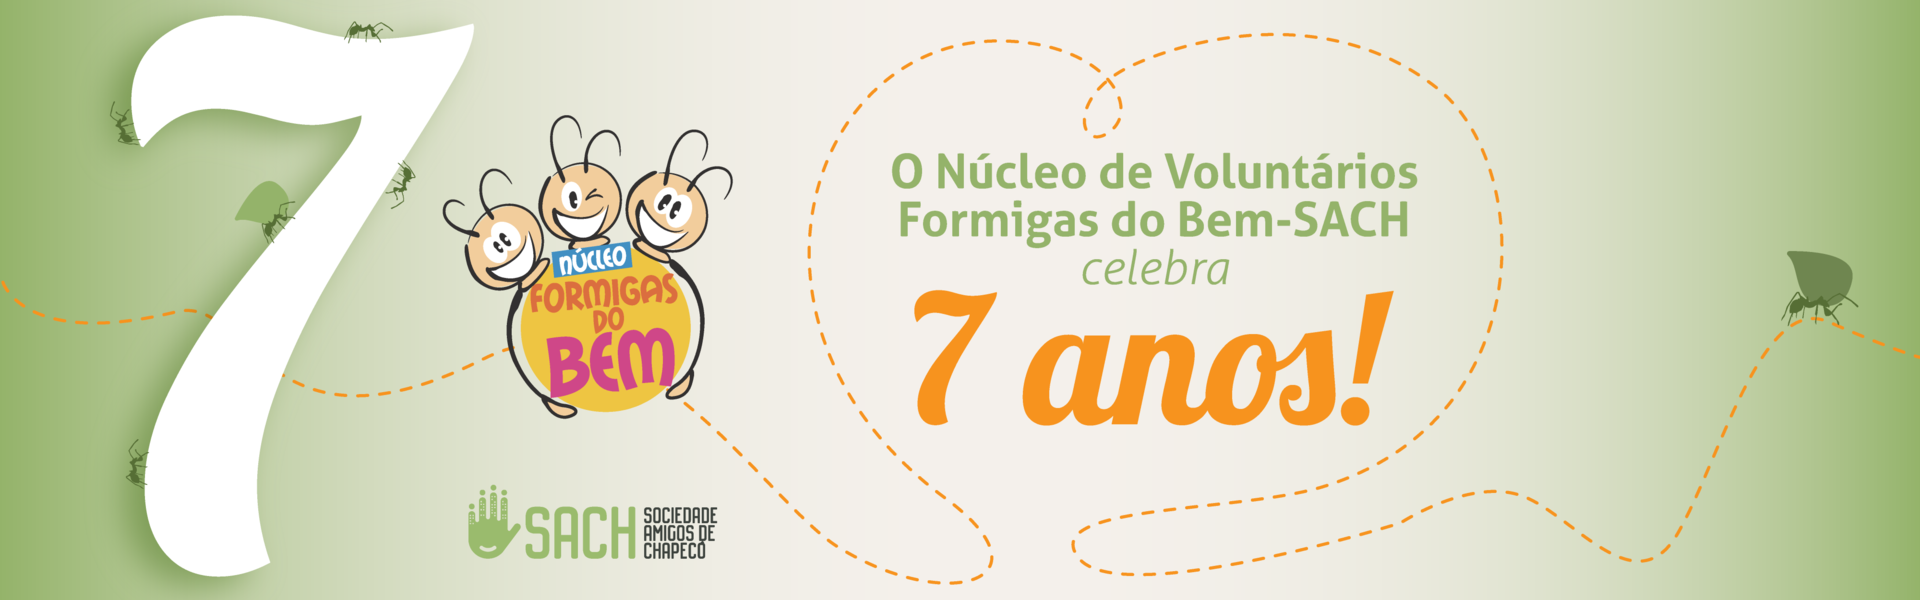 Banner site 7 anos formigas 1920x600